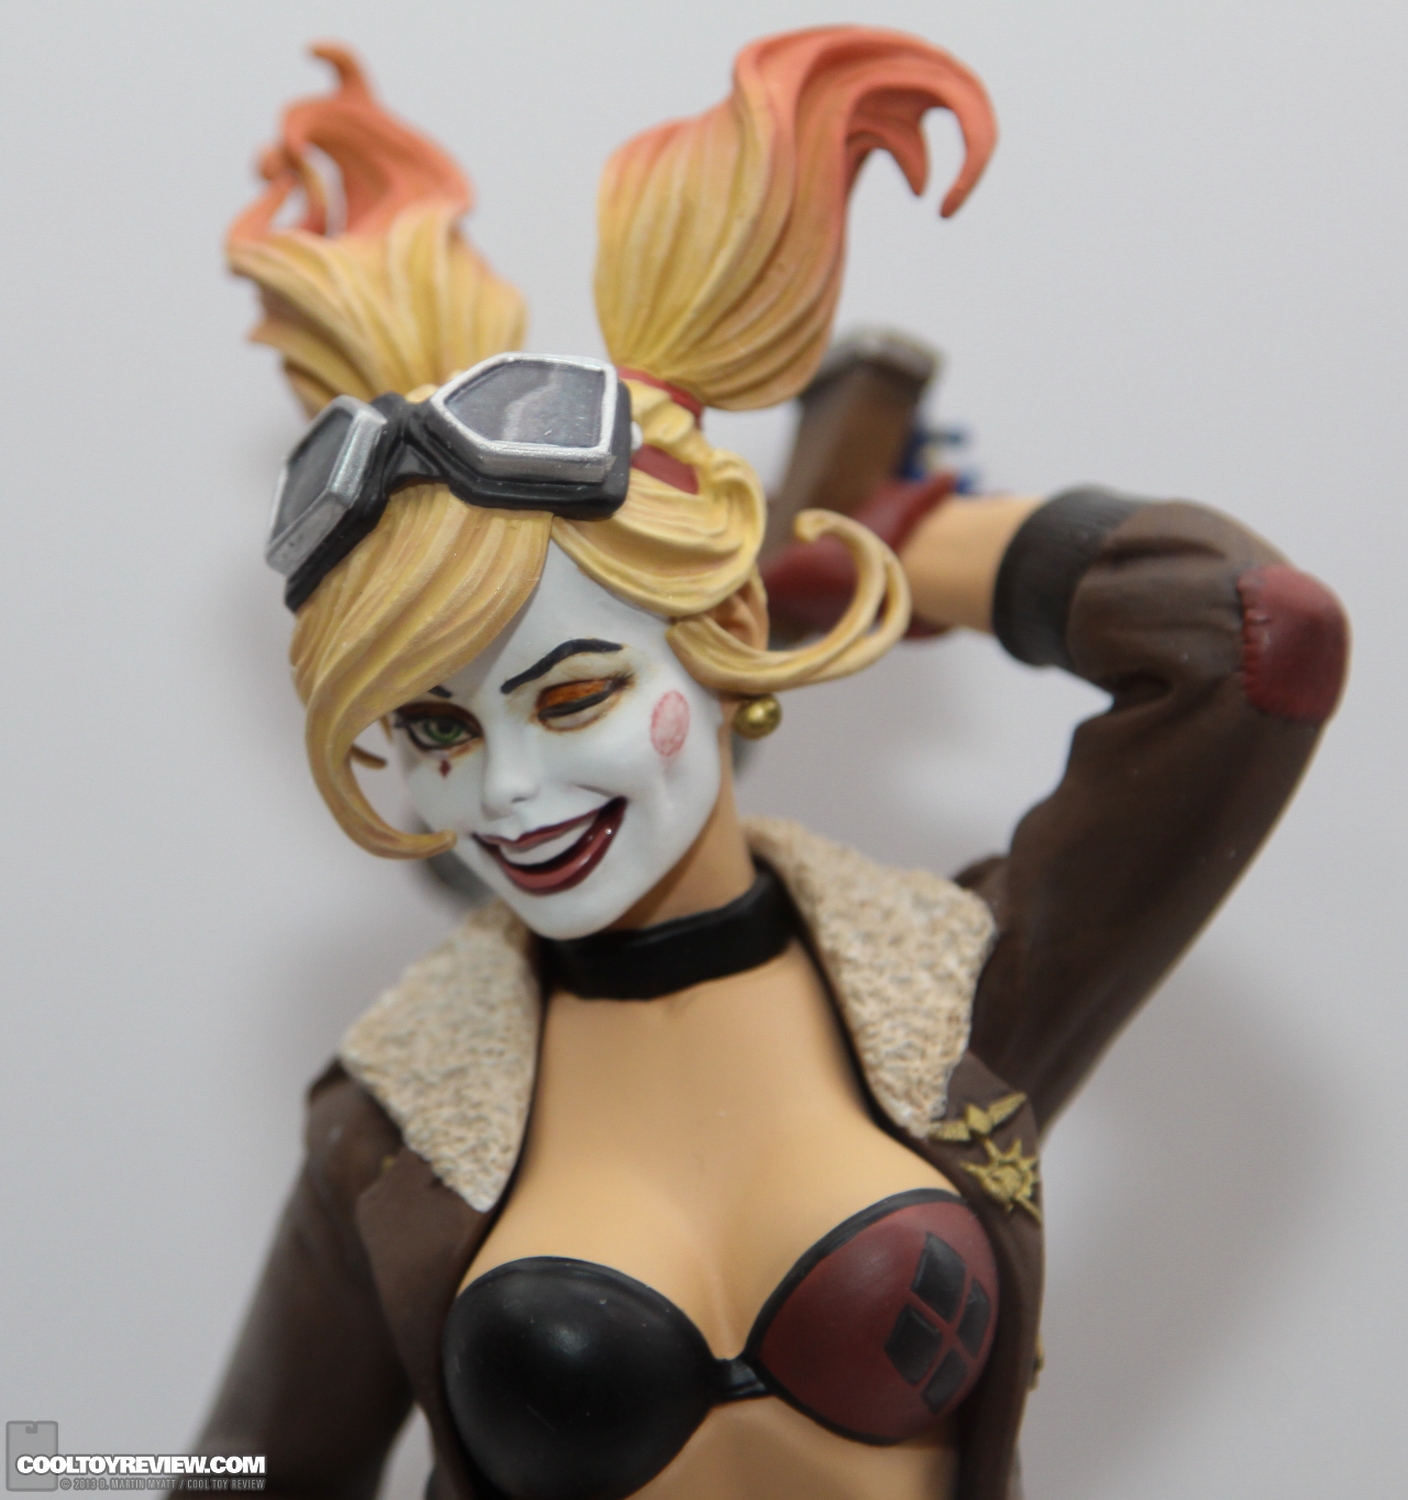 SDCC_2013_DC_Collectibles_Saturday-044.jpg